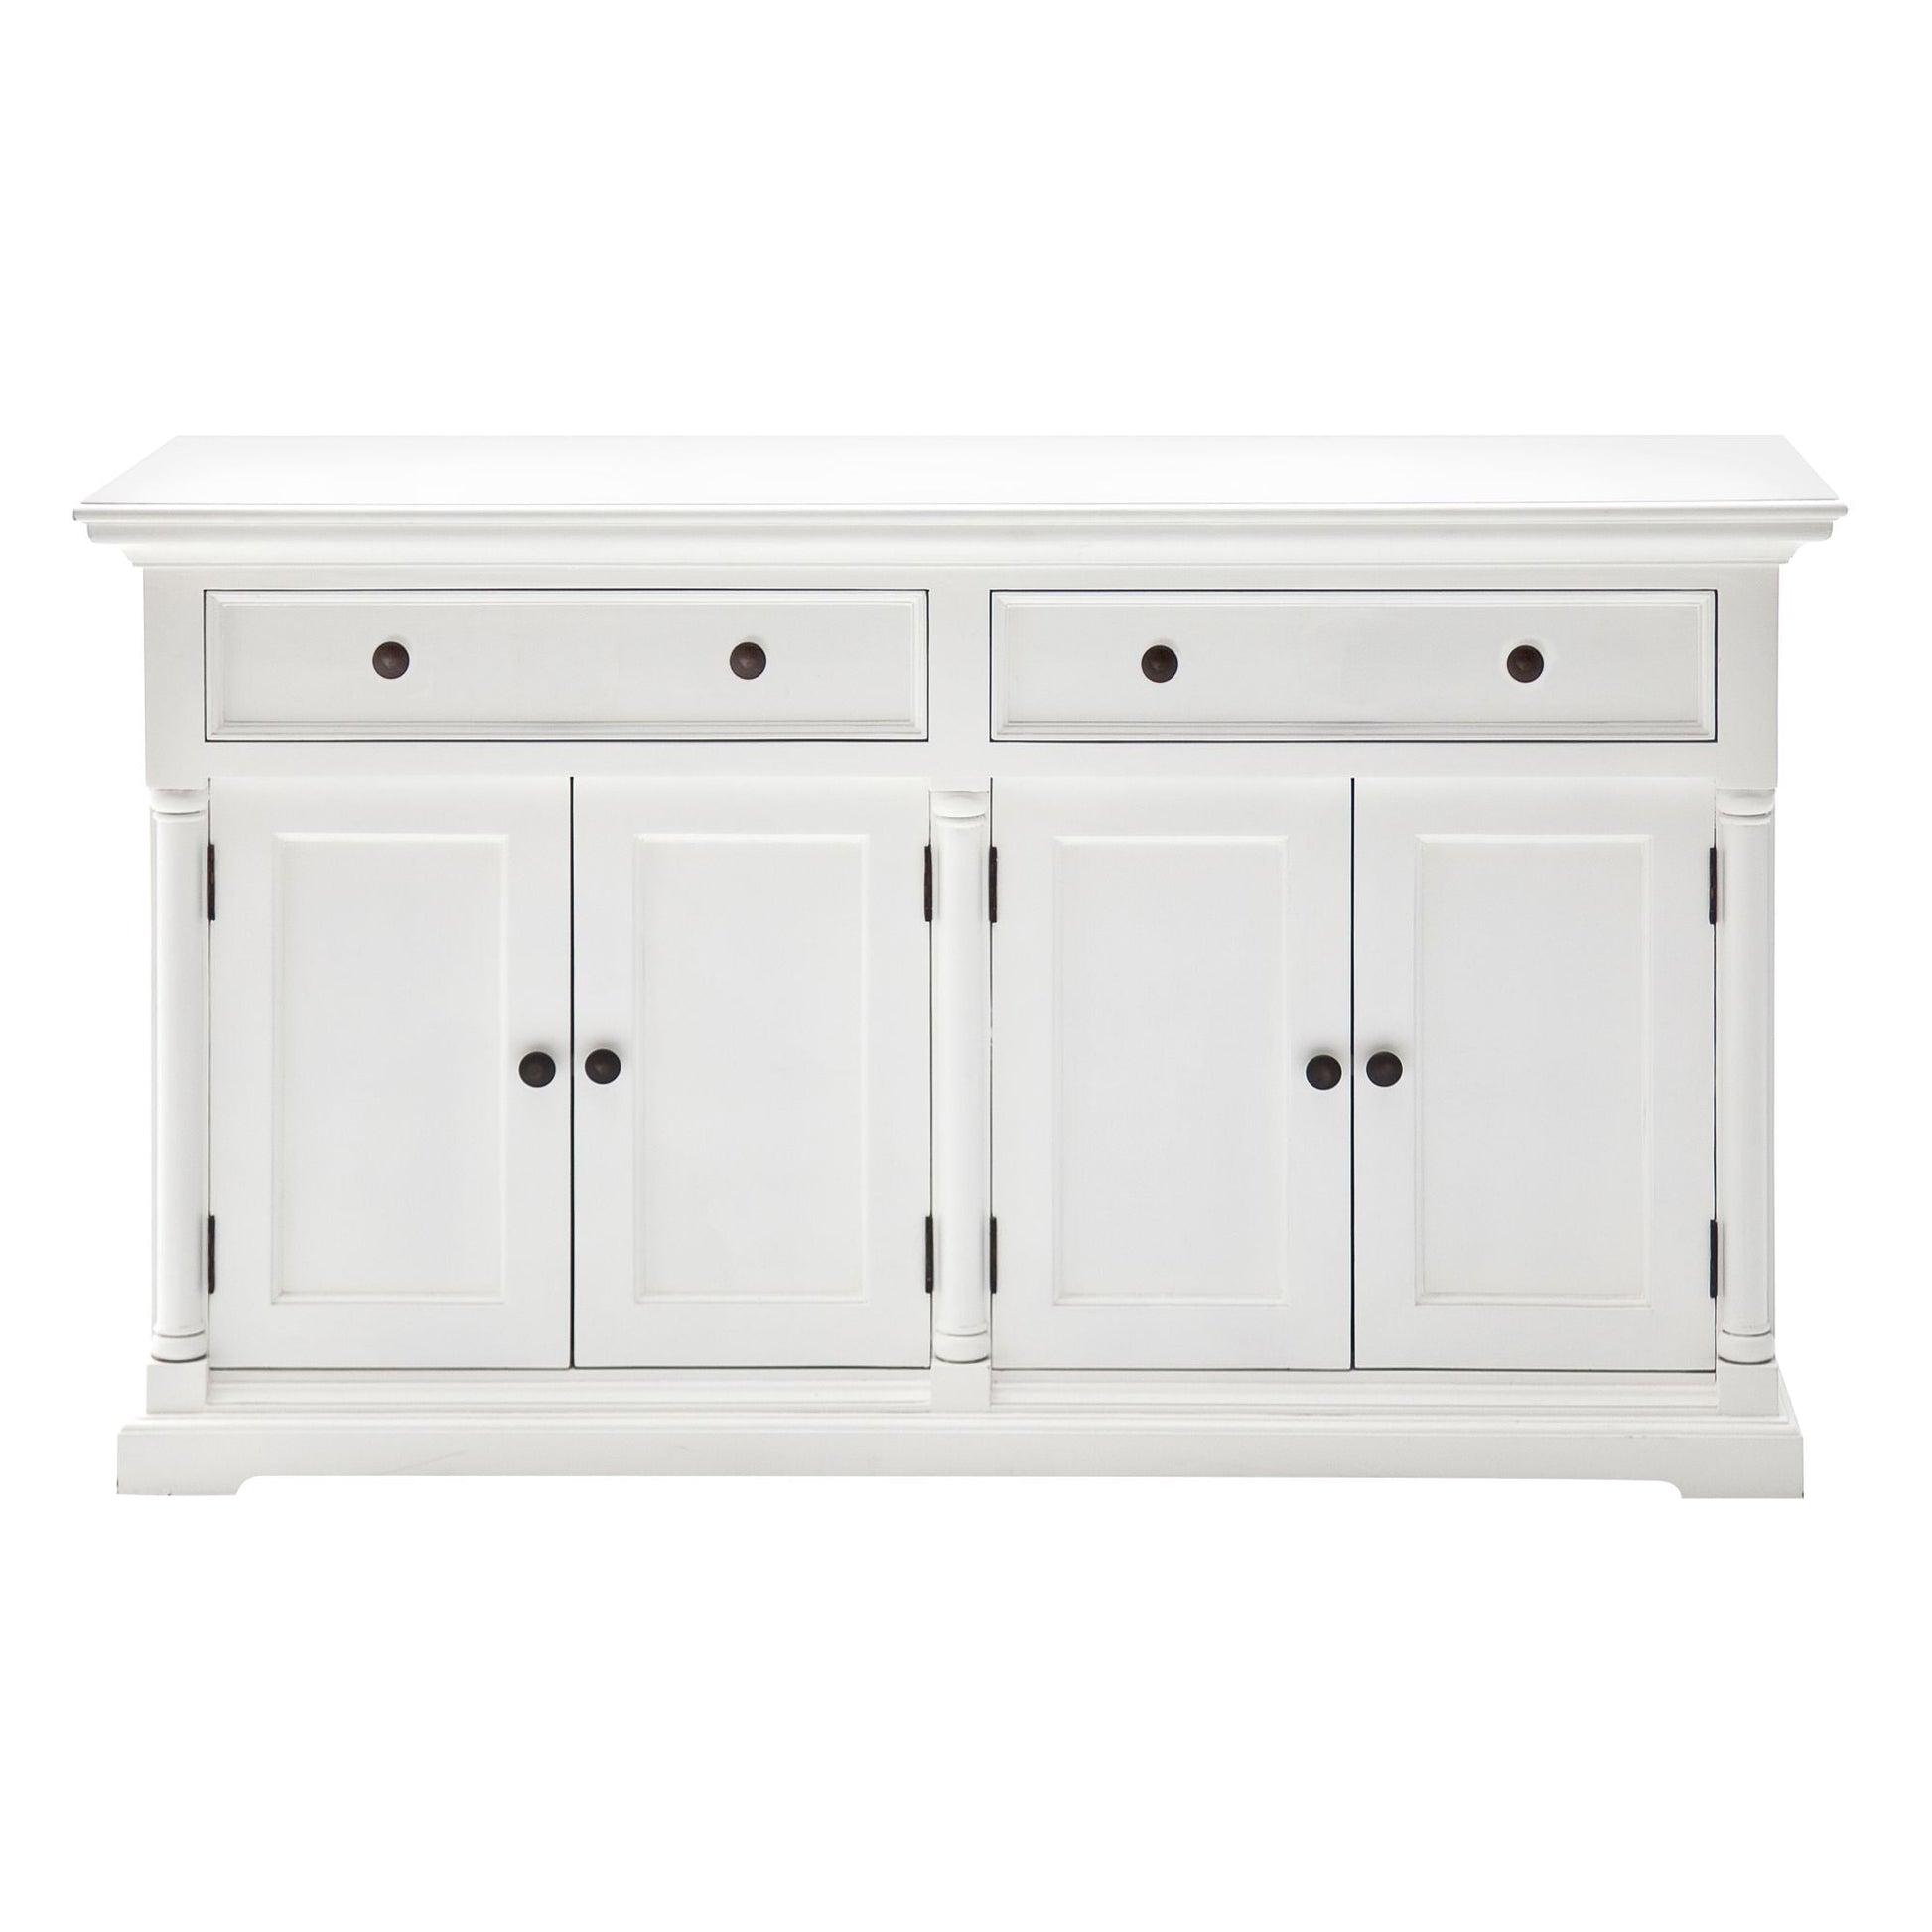 NovaSolo Provence 57" Classic White Mahogany Hutch Cabinet With 4 Doors & 2 Drawers